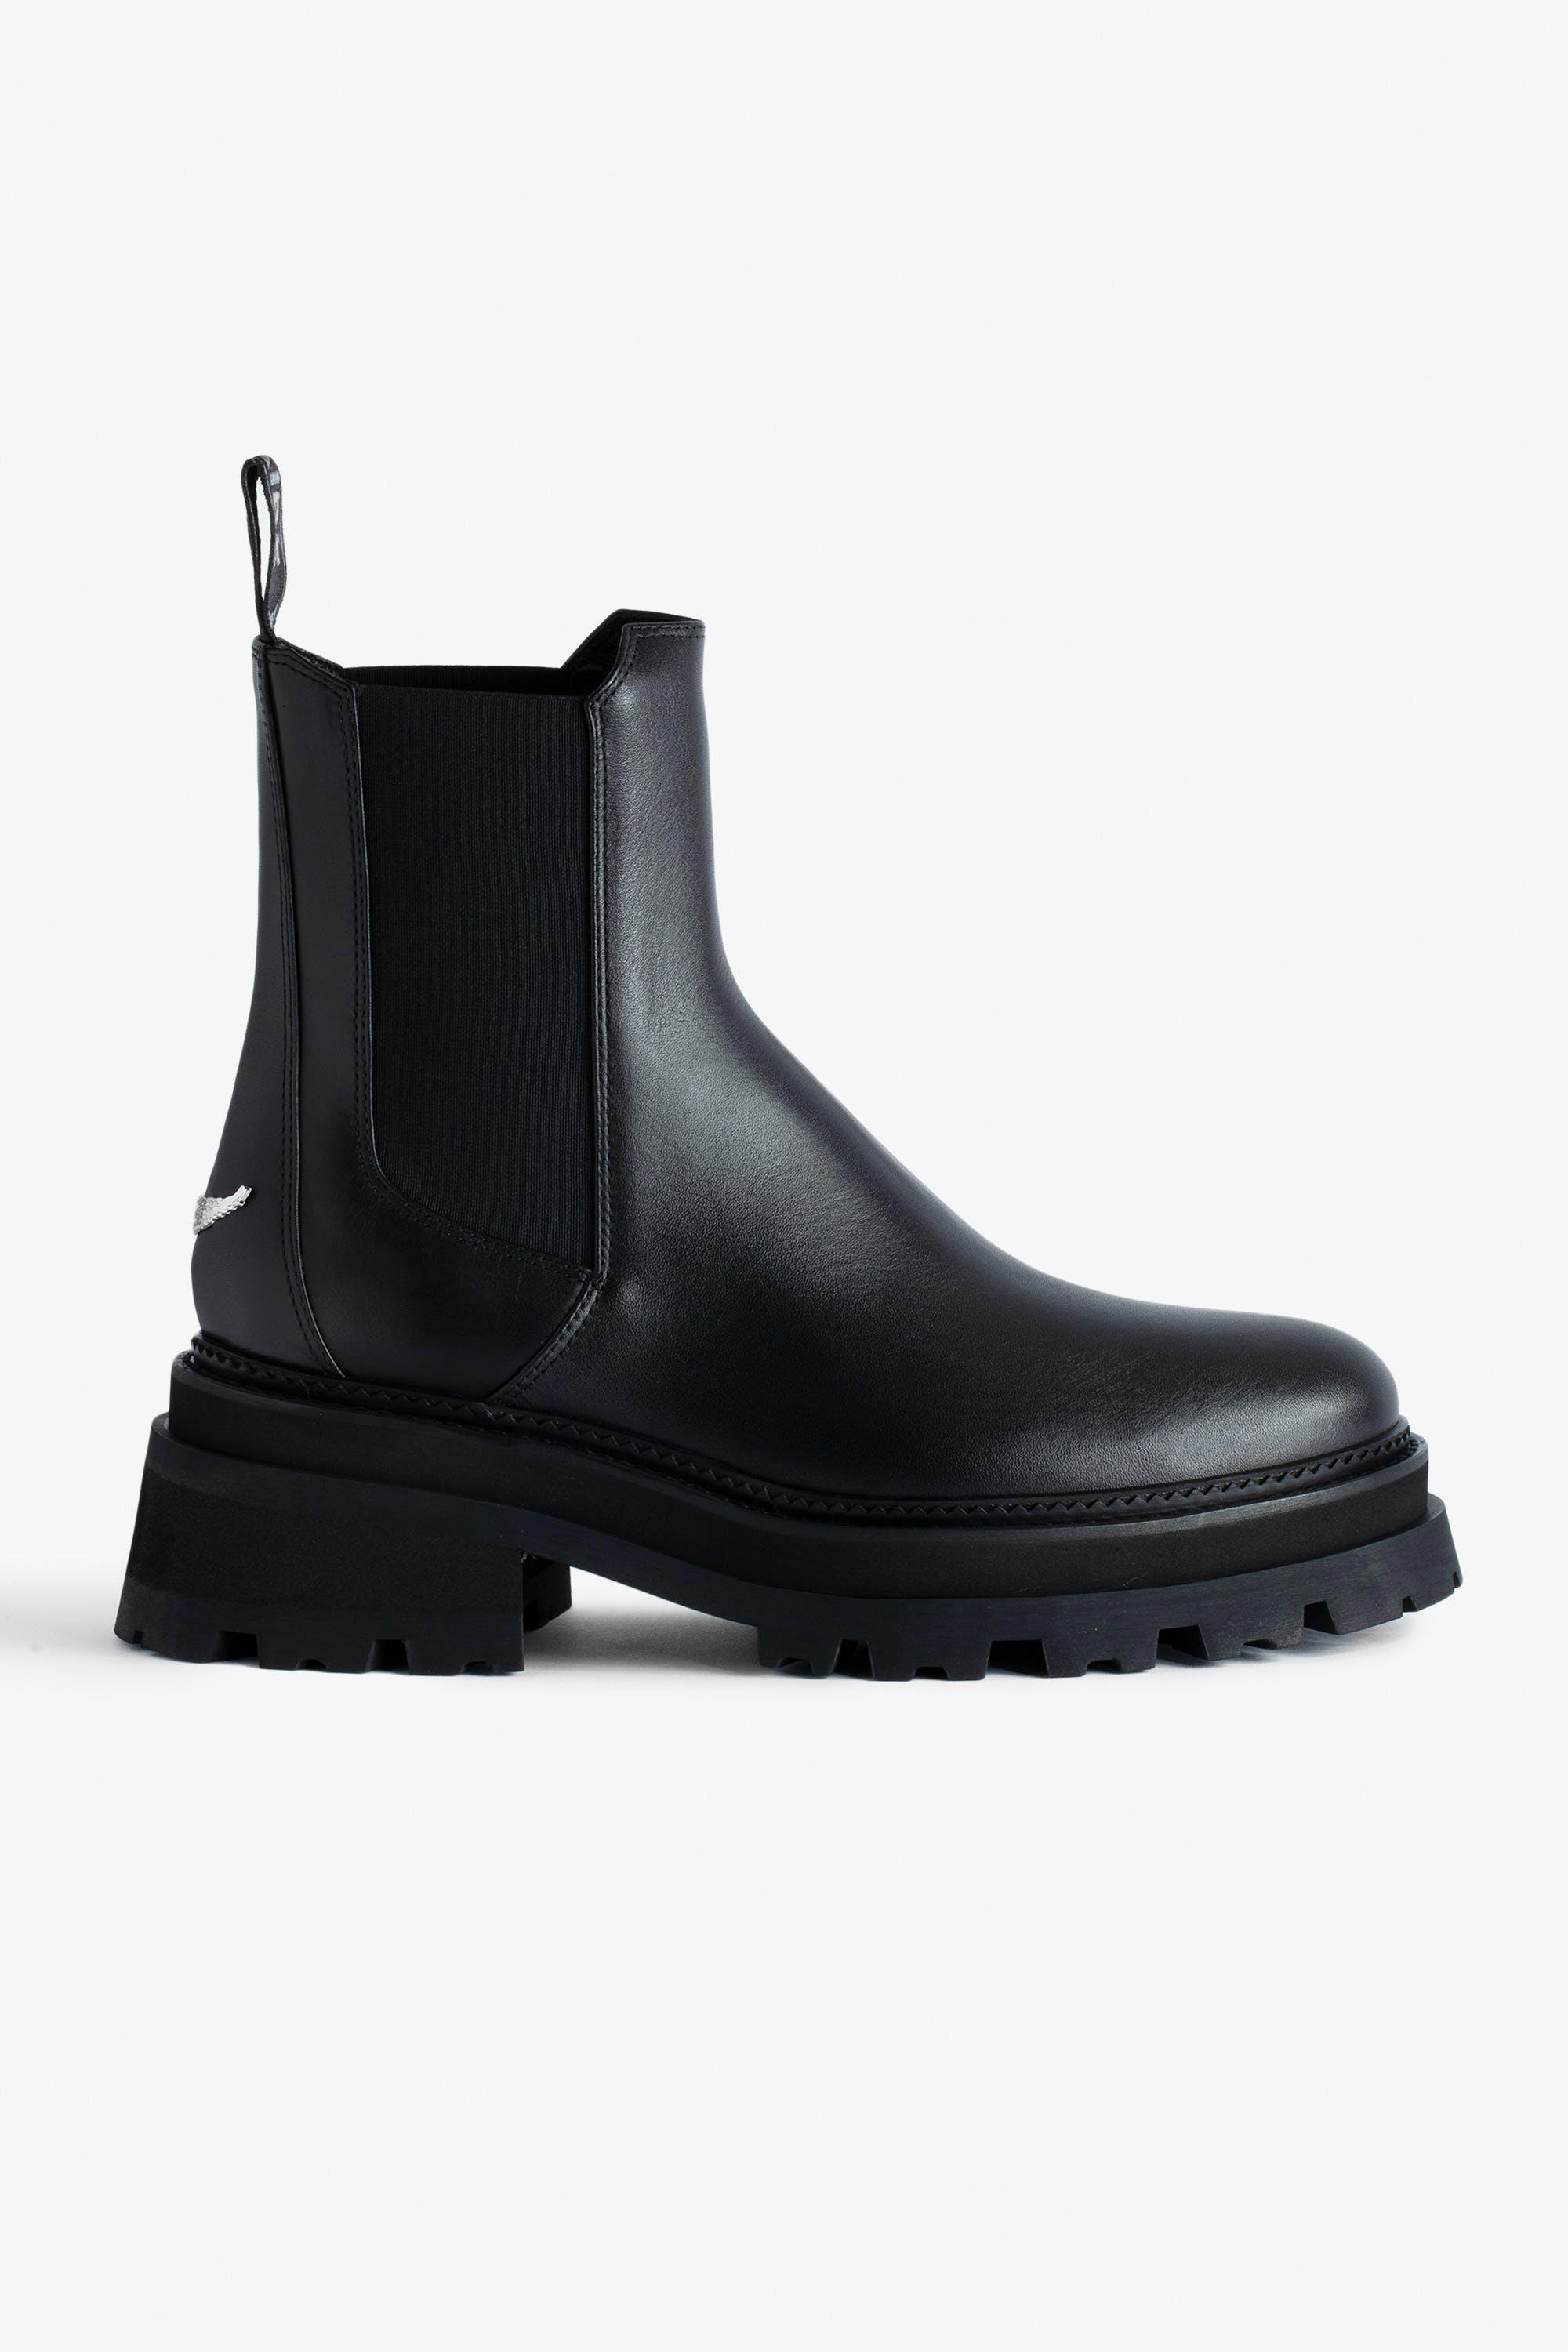 Zadig & Voltaire Ride Chelsea Boots in Black | Lyst